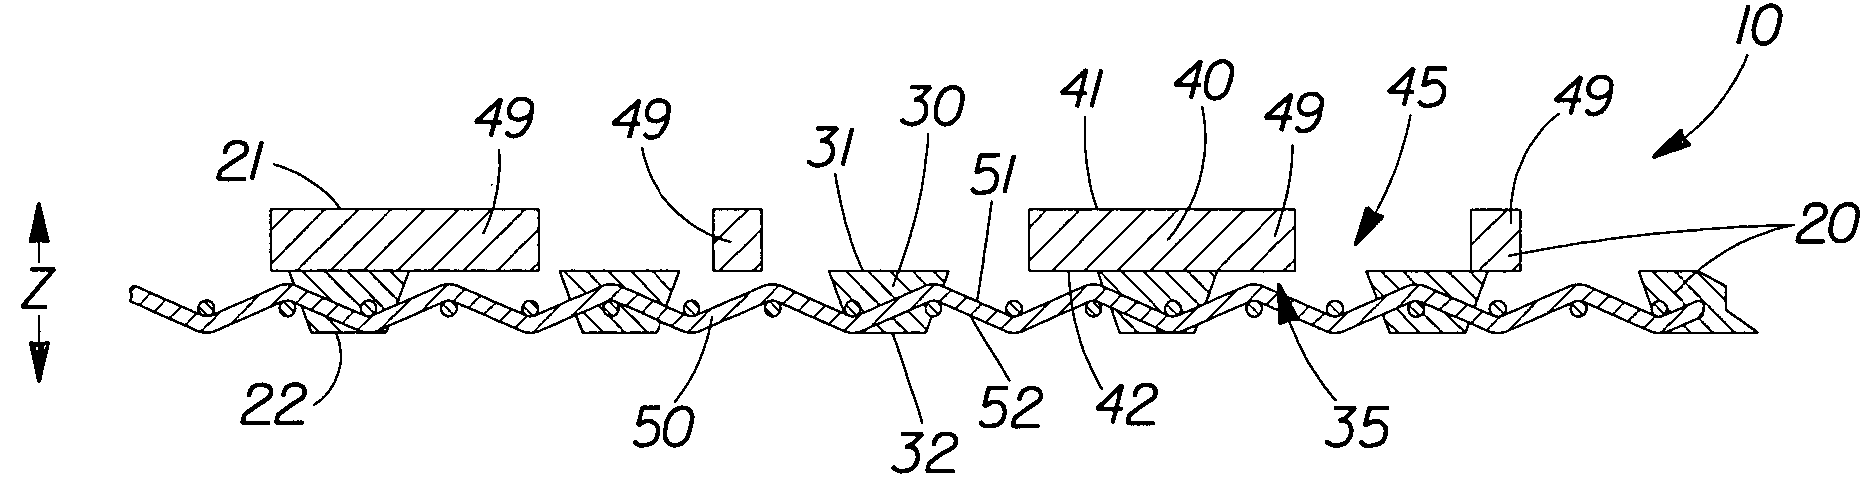 Process for producing a fibrous structure having increased surface area